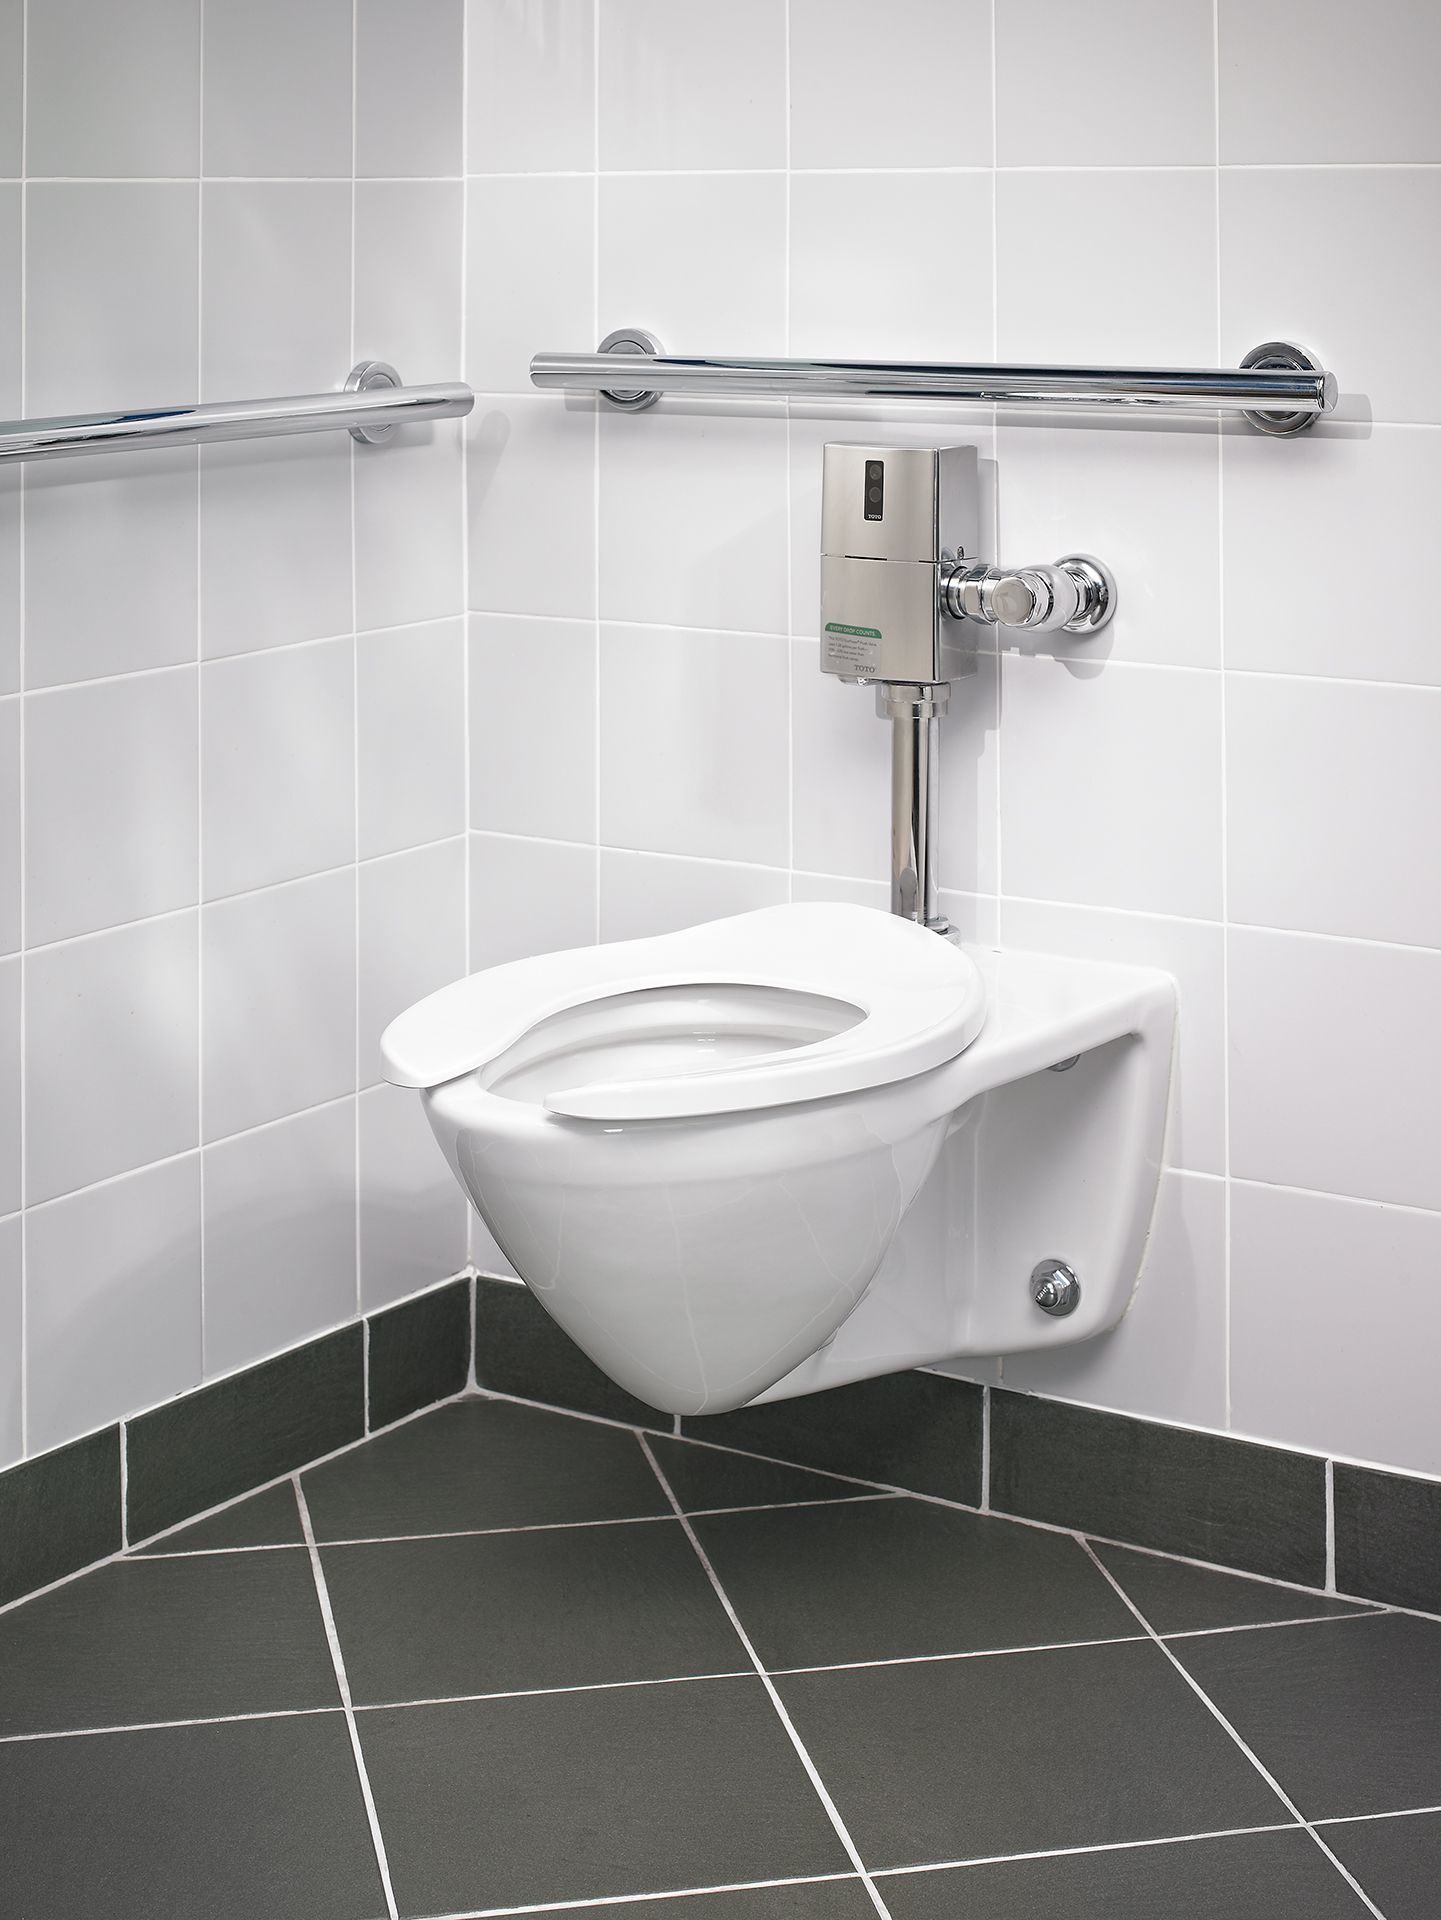 Commercial Ultra-High Efficiency Toilet, 1.0 GPF, Elongated Bowl 